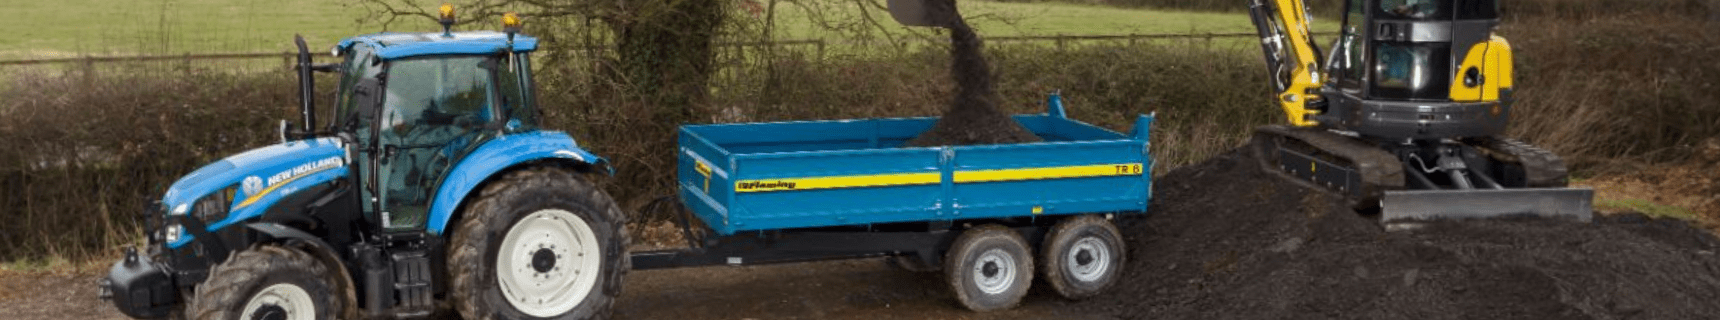 M4 Trailers – Flat Bed/Bale Trailers Head Image